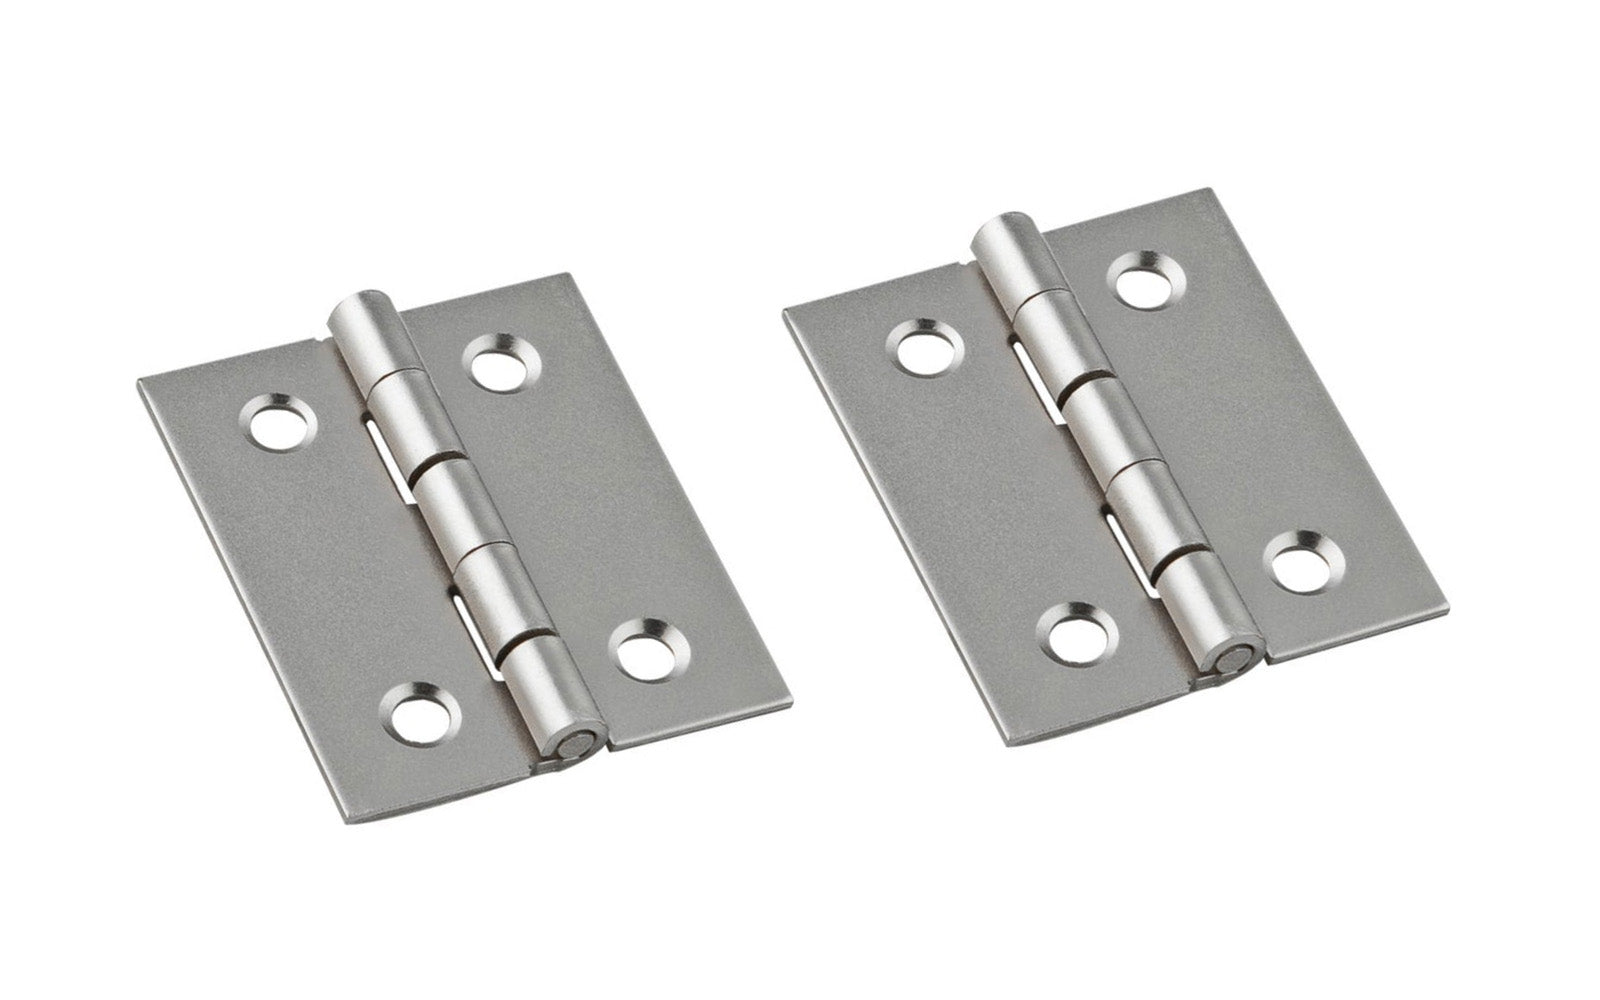 These miniature hinges are designed to add a decorative appearance to small chests, jewelry boxes, craft projects, etc. Made of steel material with a satin nickel finish. 1-1/2